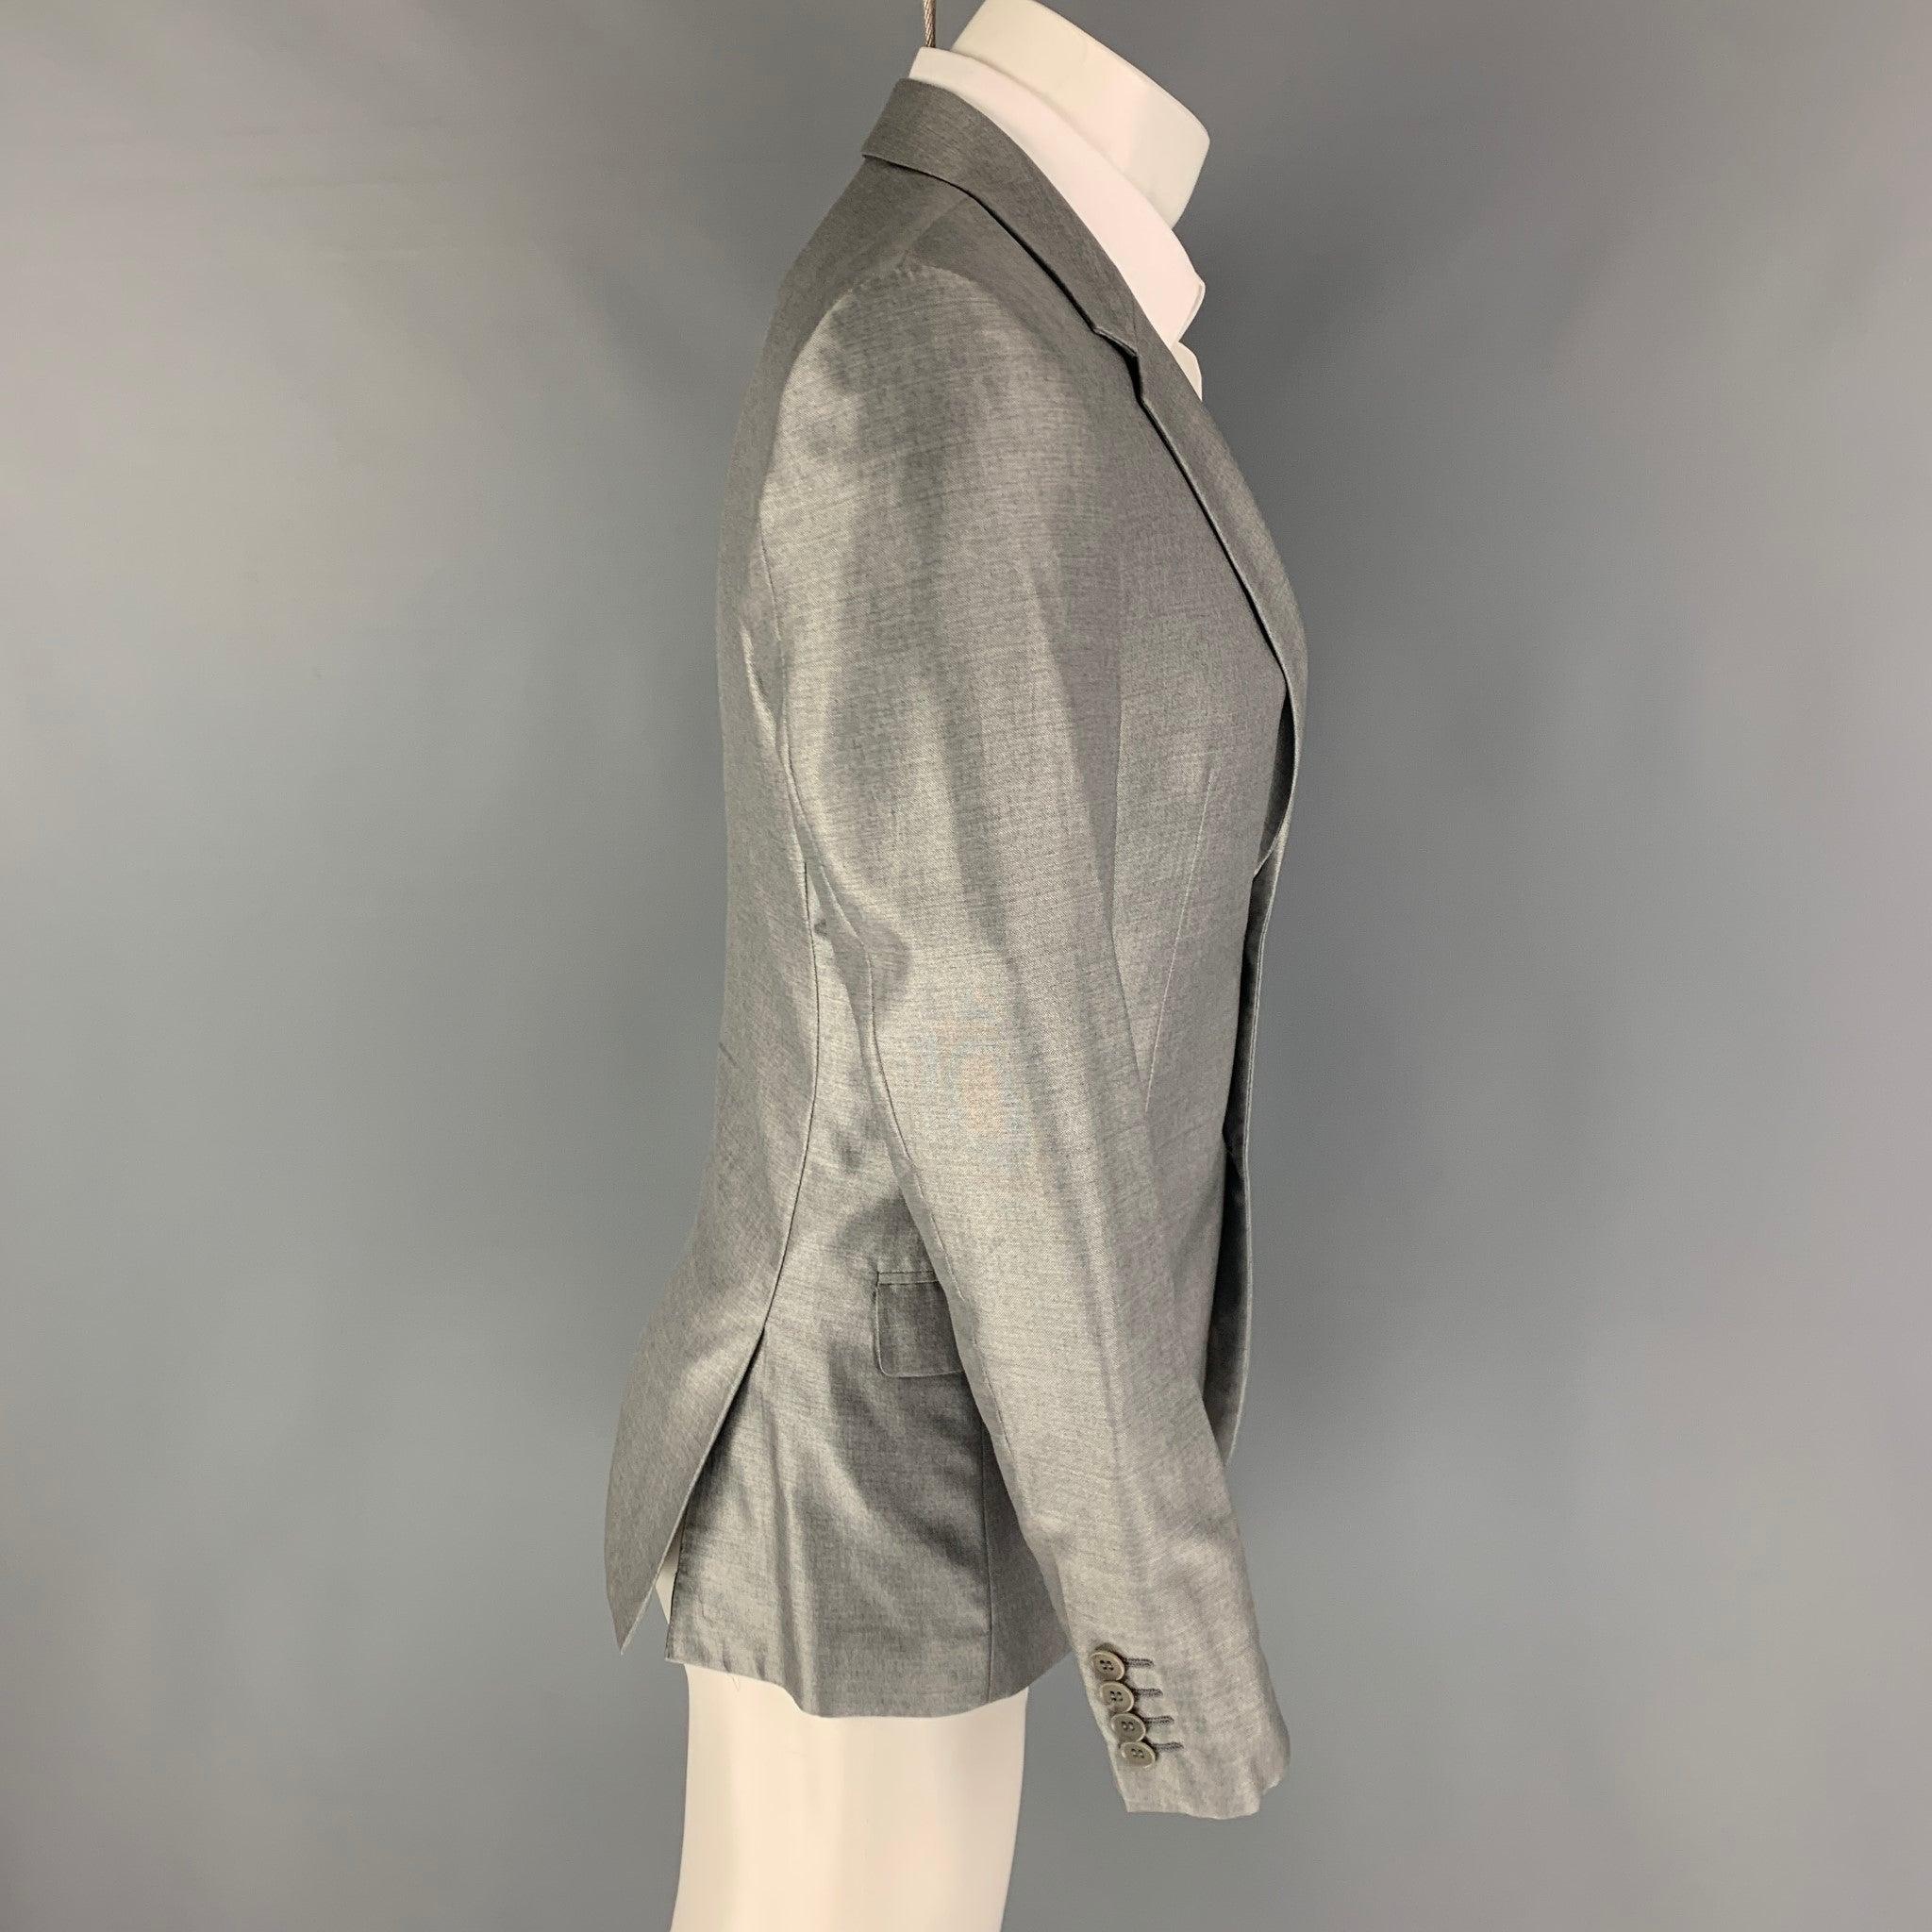 CALVIN KLEIN sport coat comes in a grey rayon with a full liner featuring a notch lapel, flap pockets, double back vent, and a double button closure.
Excellent
Pre-Owned Condition. 

Marked:   46/36 

Measurements: 
 
Shoulder: 17 inches Chest: 36